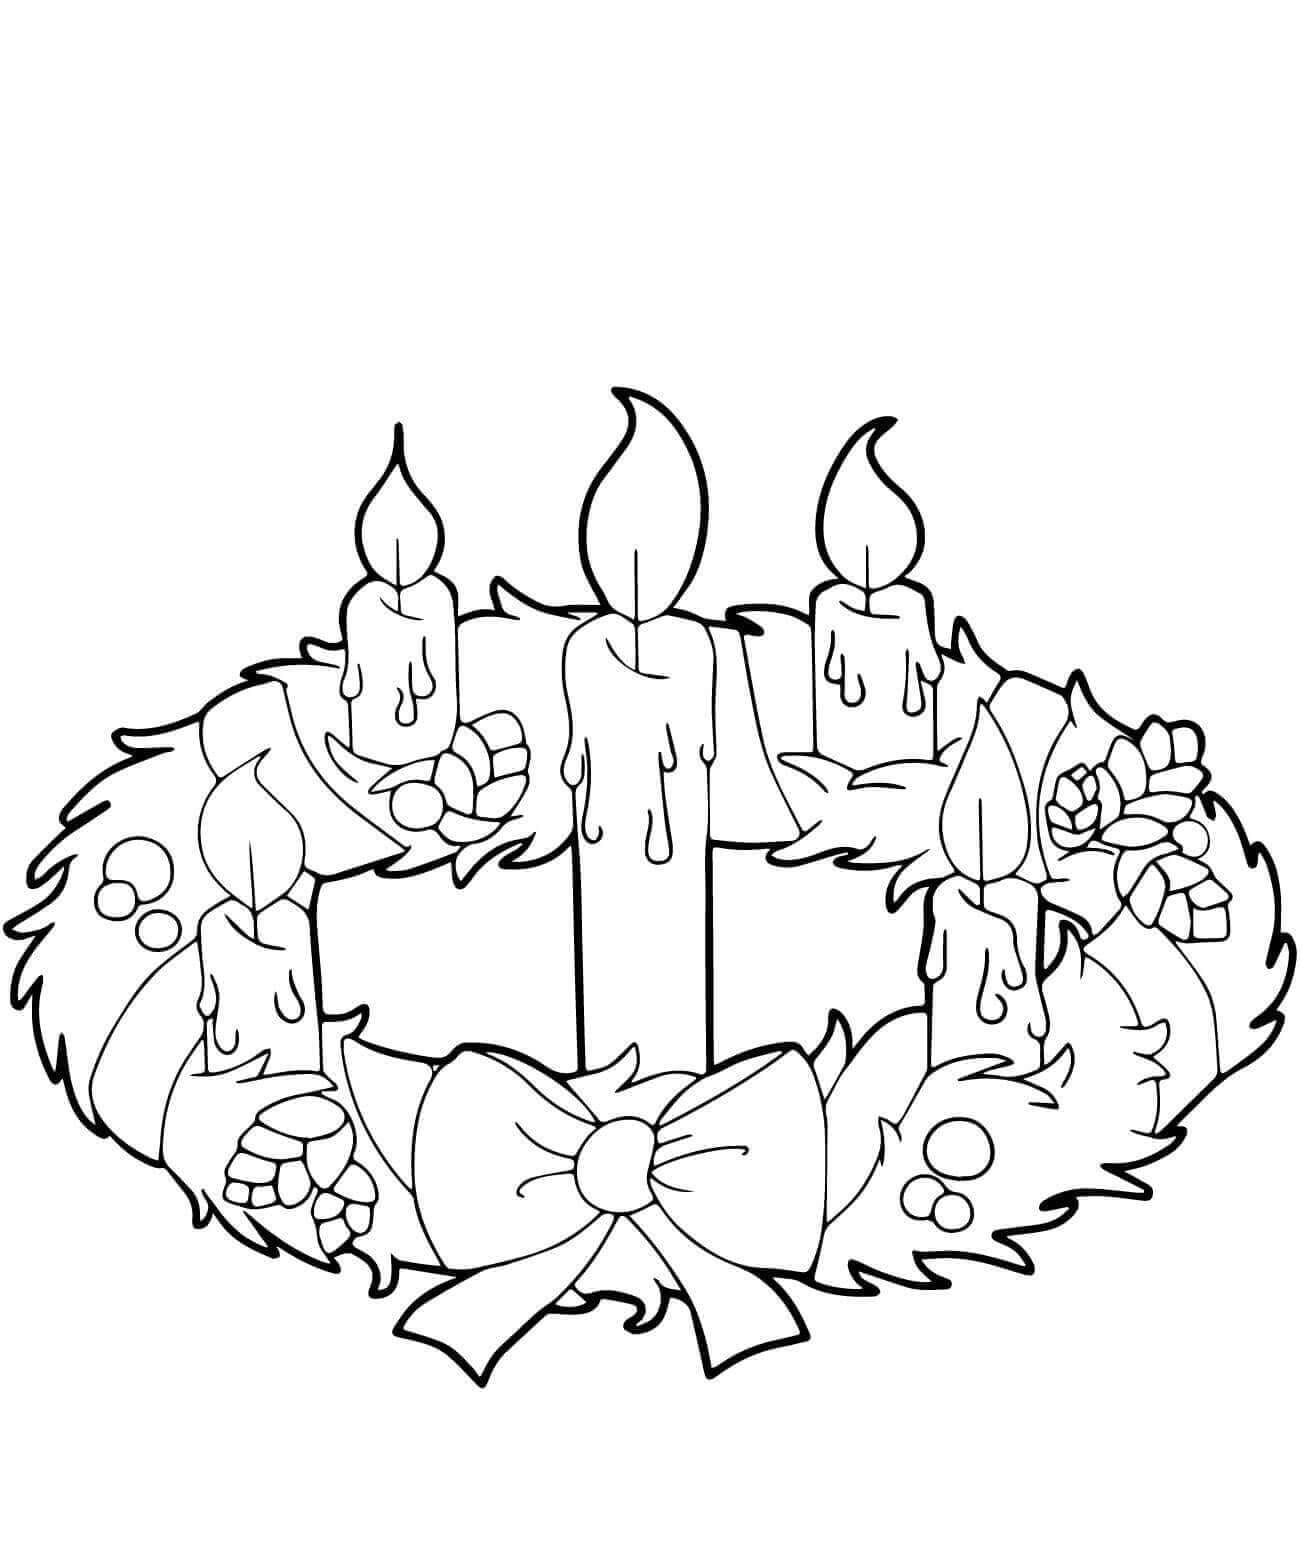 Download 30 Free Christmas Wreath Coloring Pages Printable